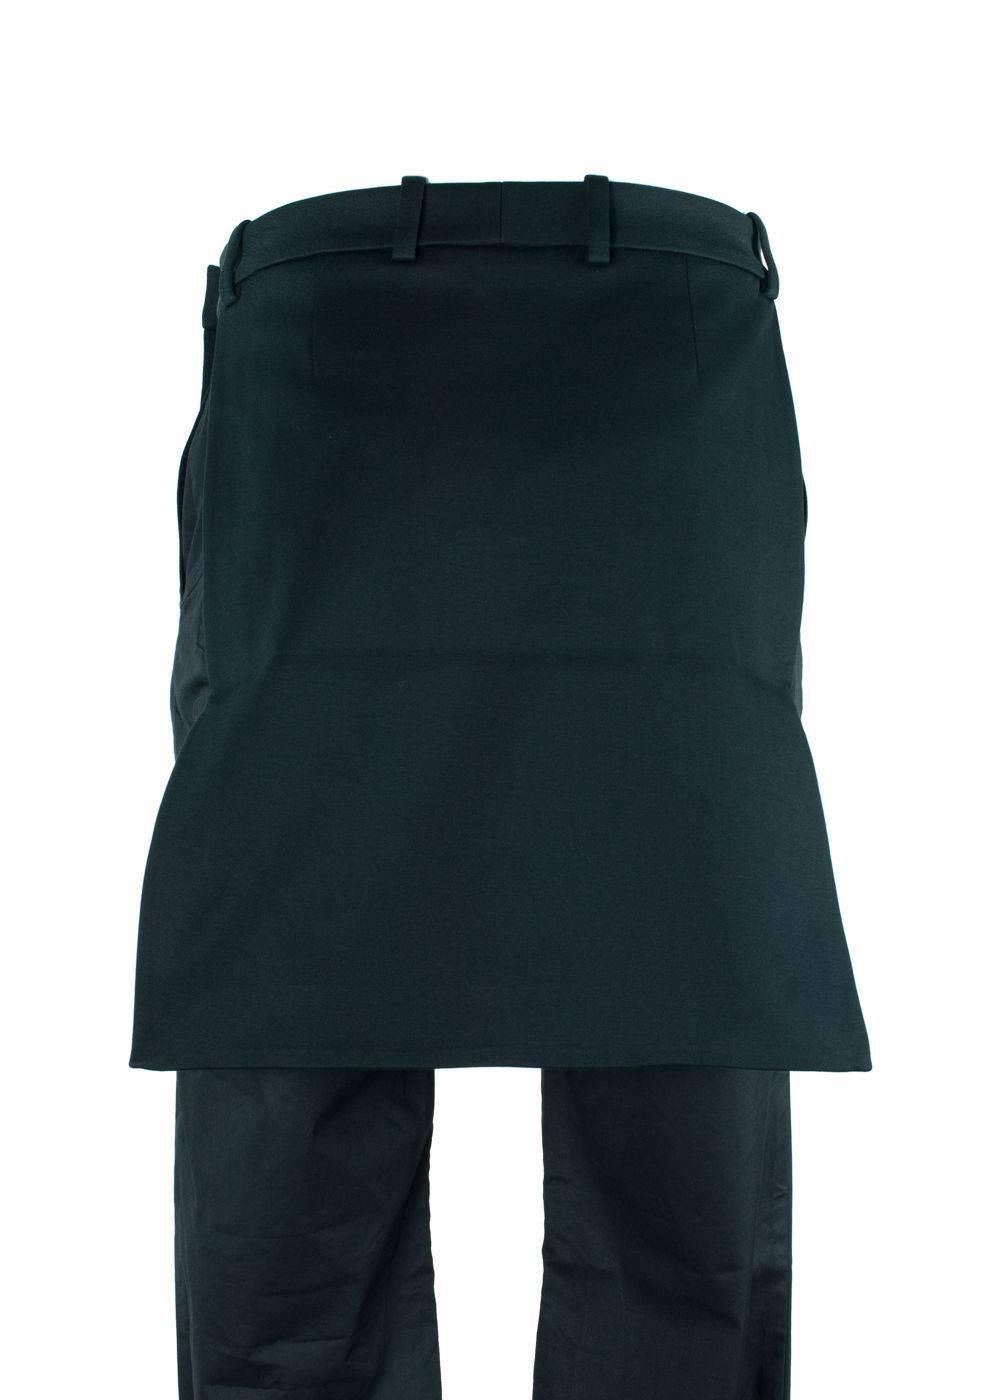 Givenchy Men's Black Cotton 17 Introductory Skirt In New Condition For Sale In Brooklyn, NY